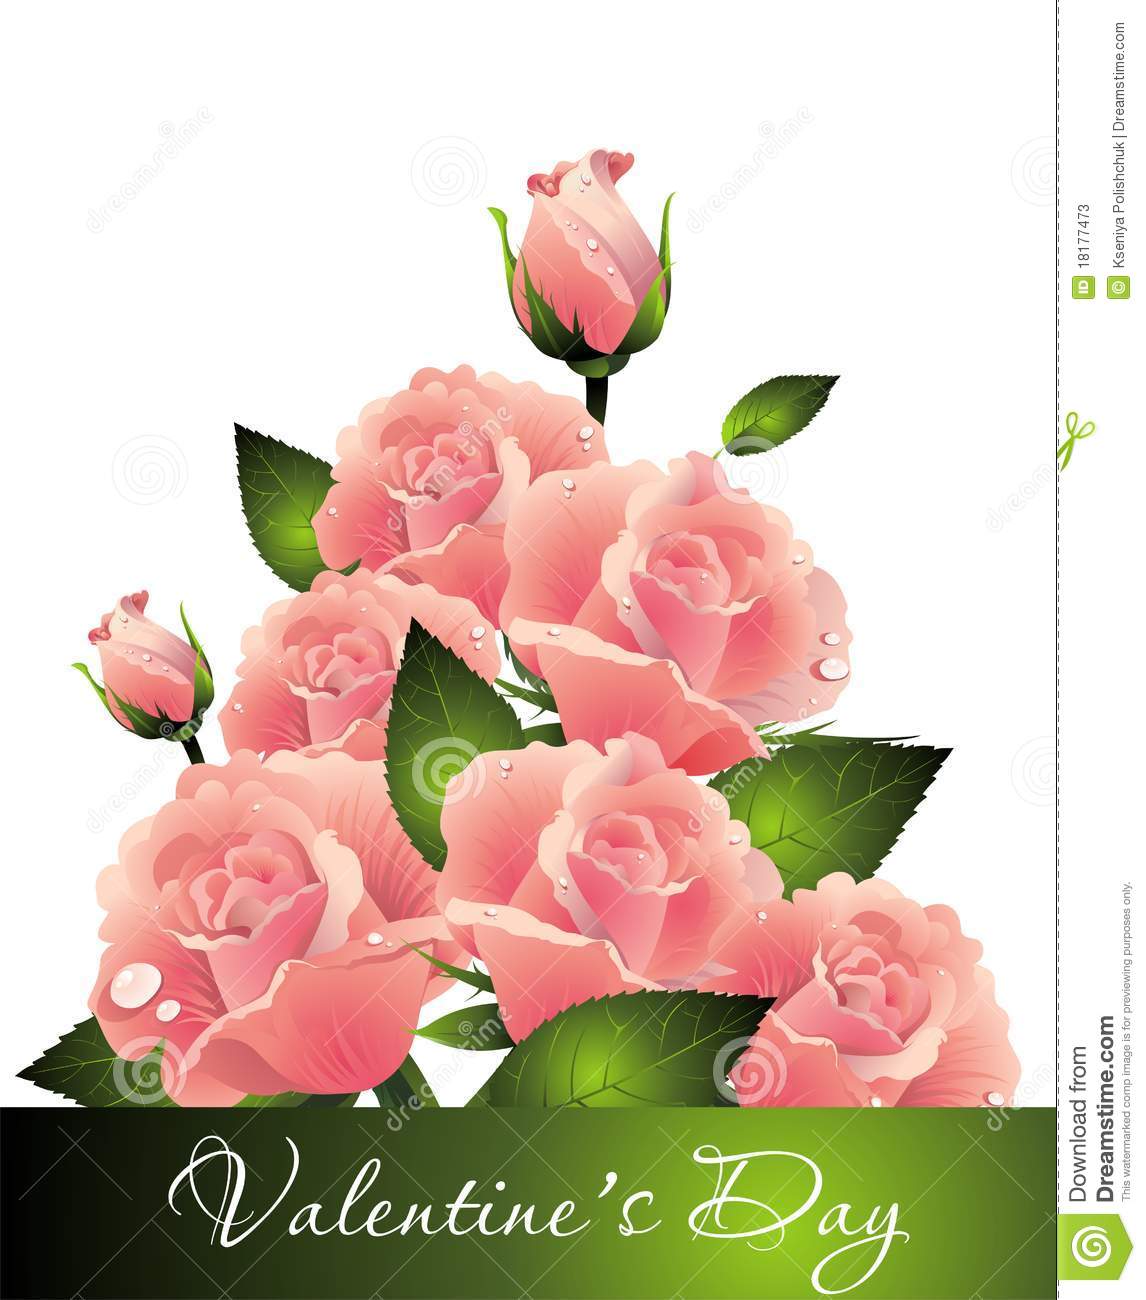 Bouquet Of Roses For Valentine S Day Stock Photos   Image  18177473